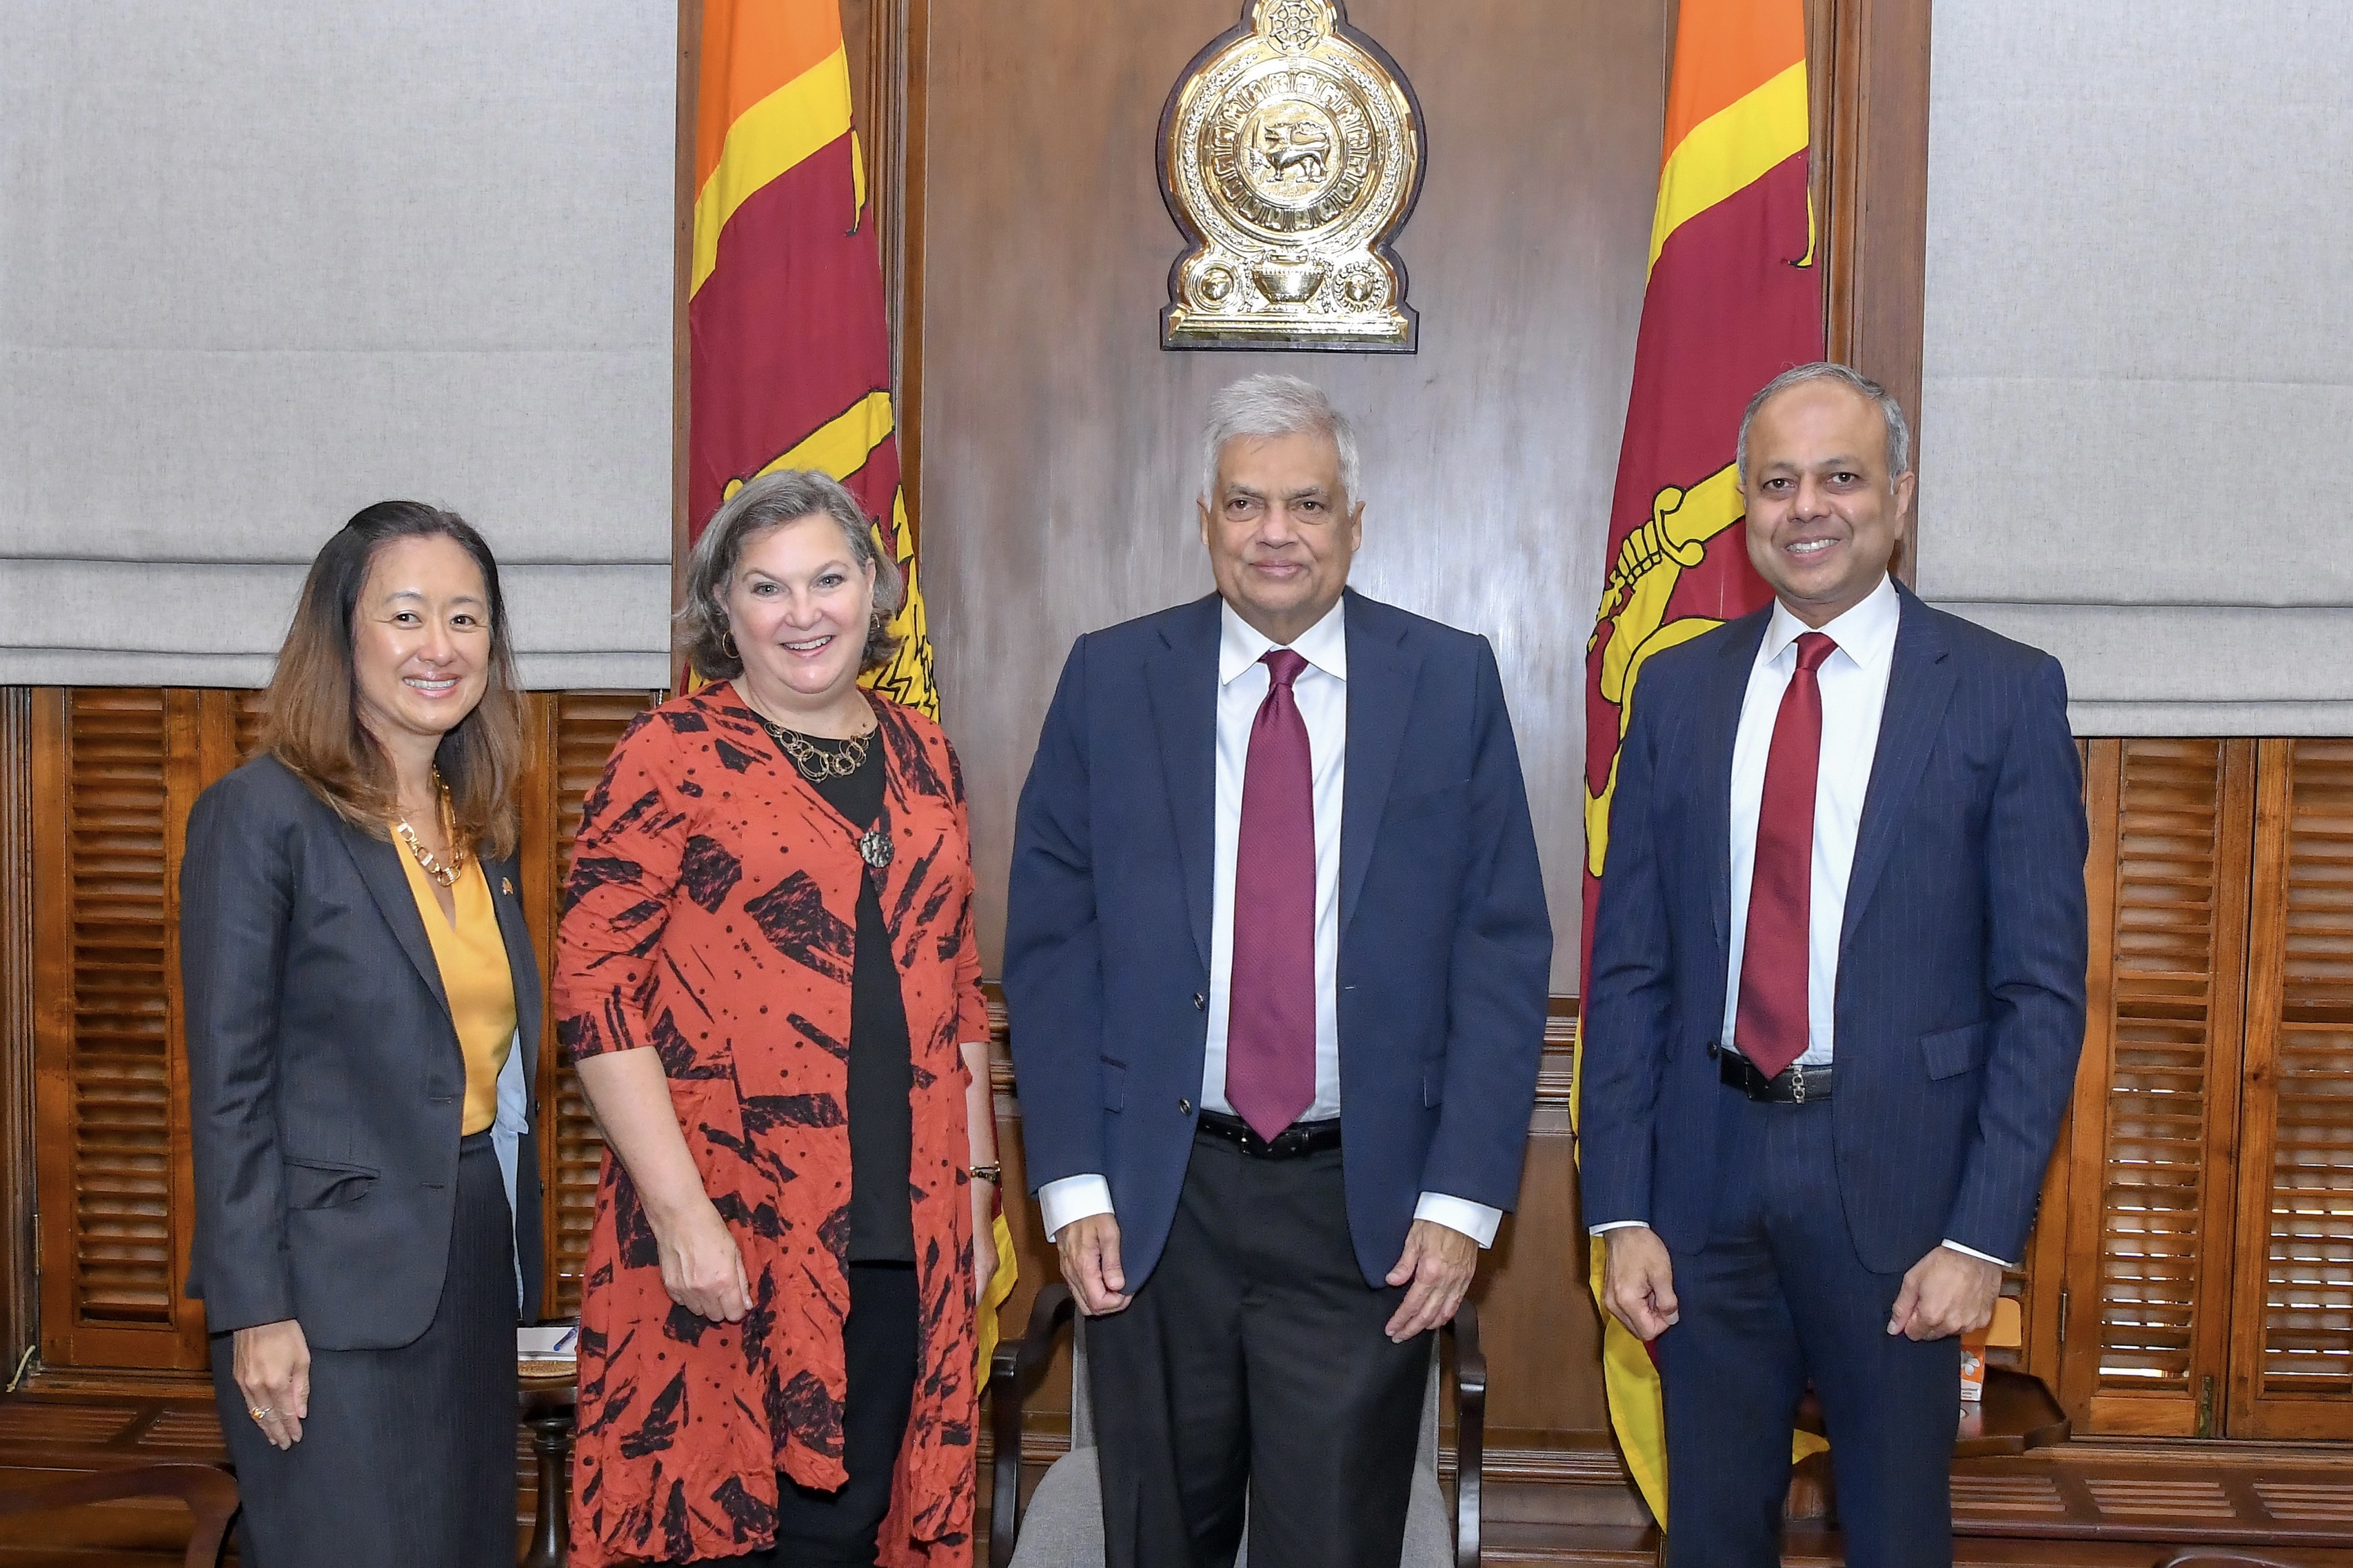 US Government expresses support for Sri Lanka’s on-going recovery efforts